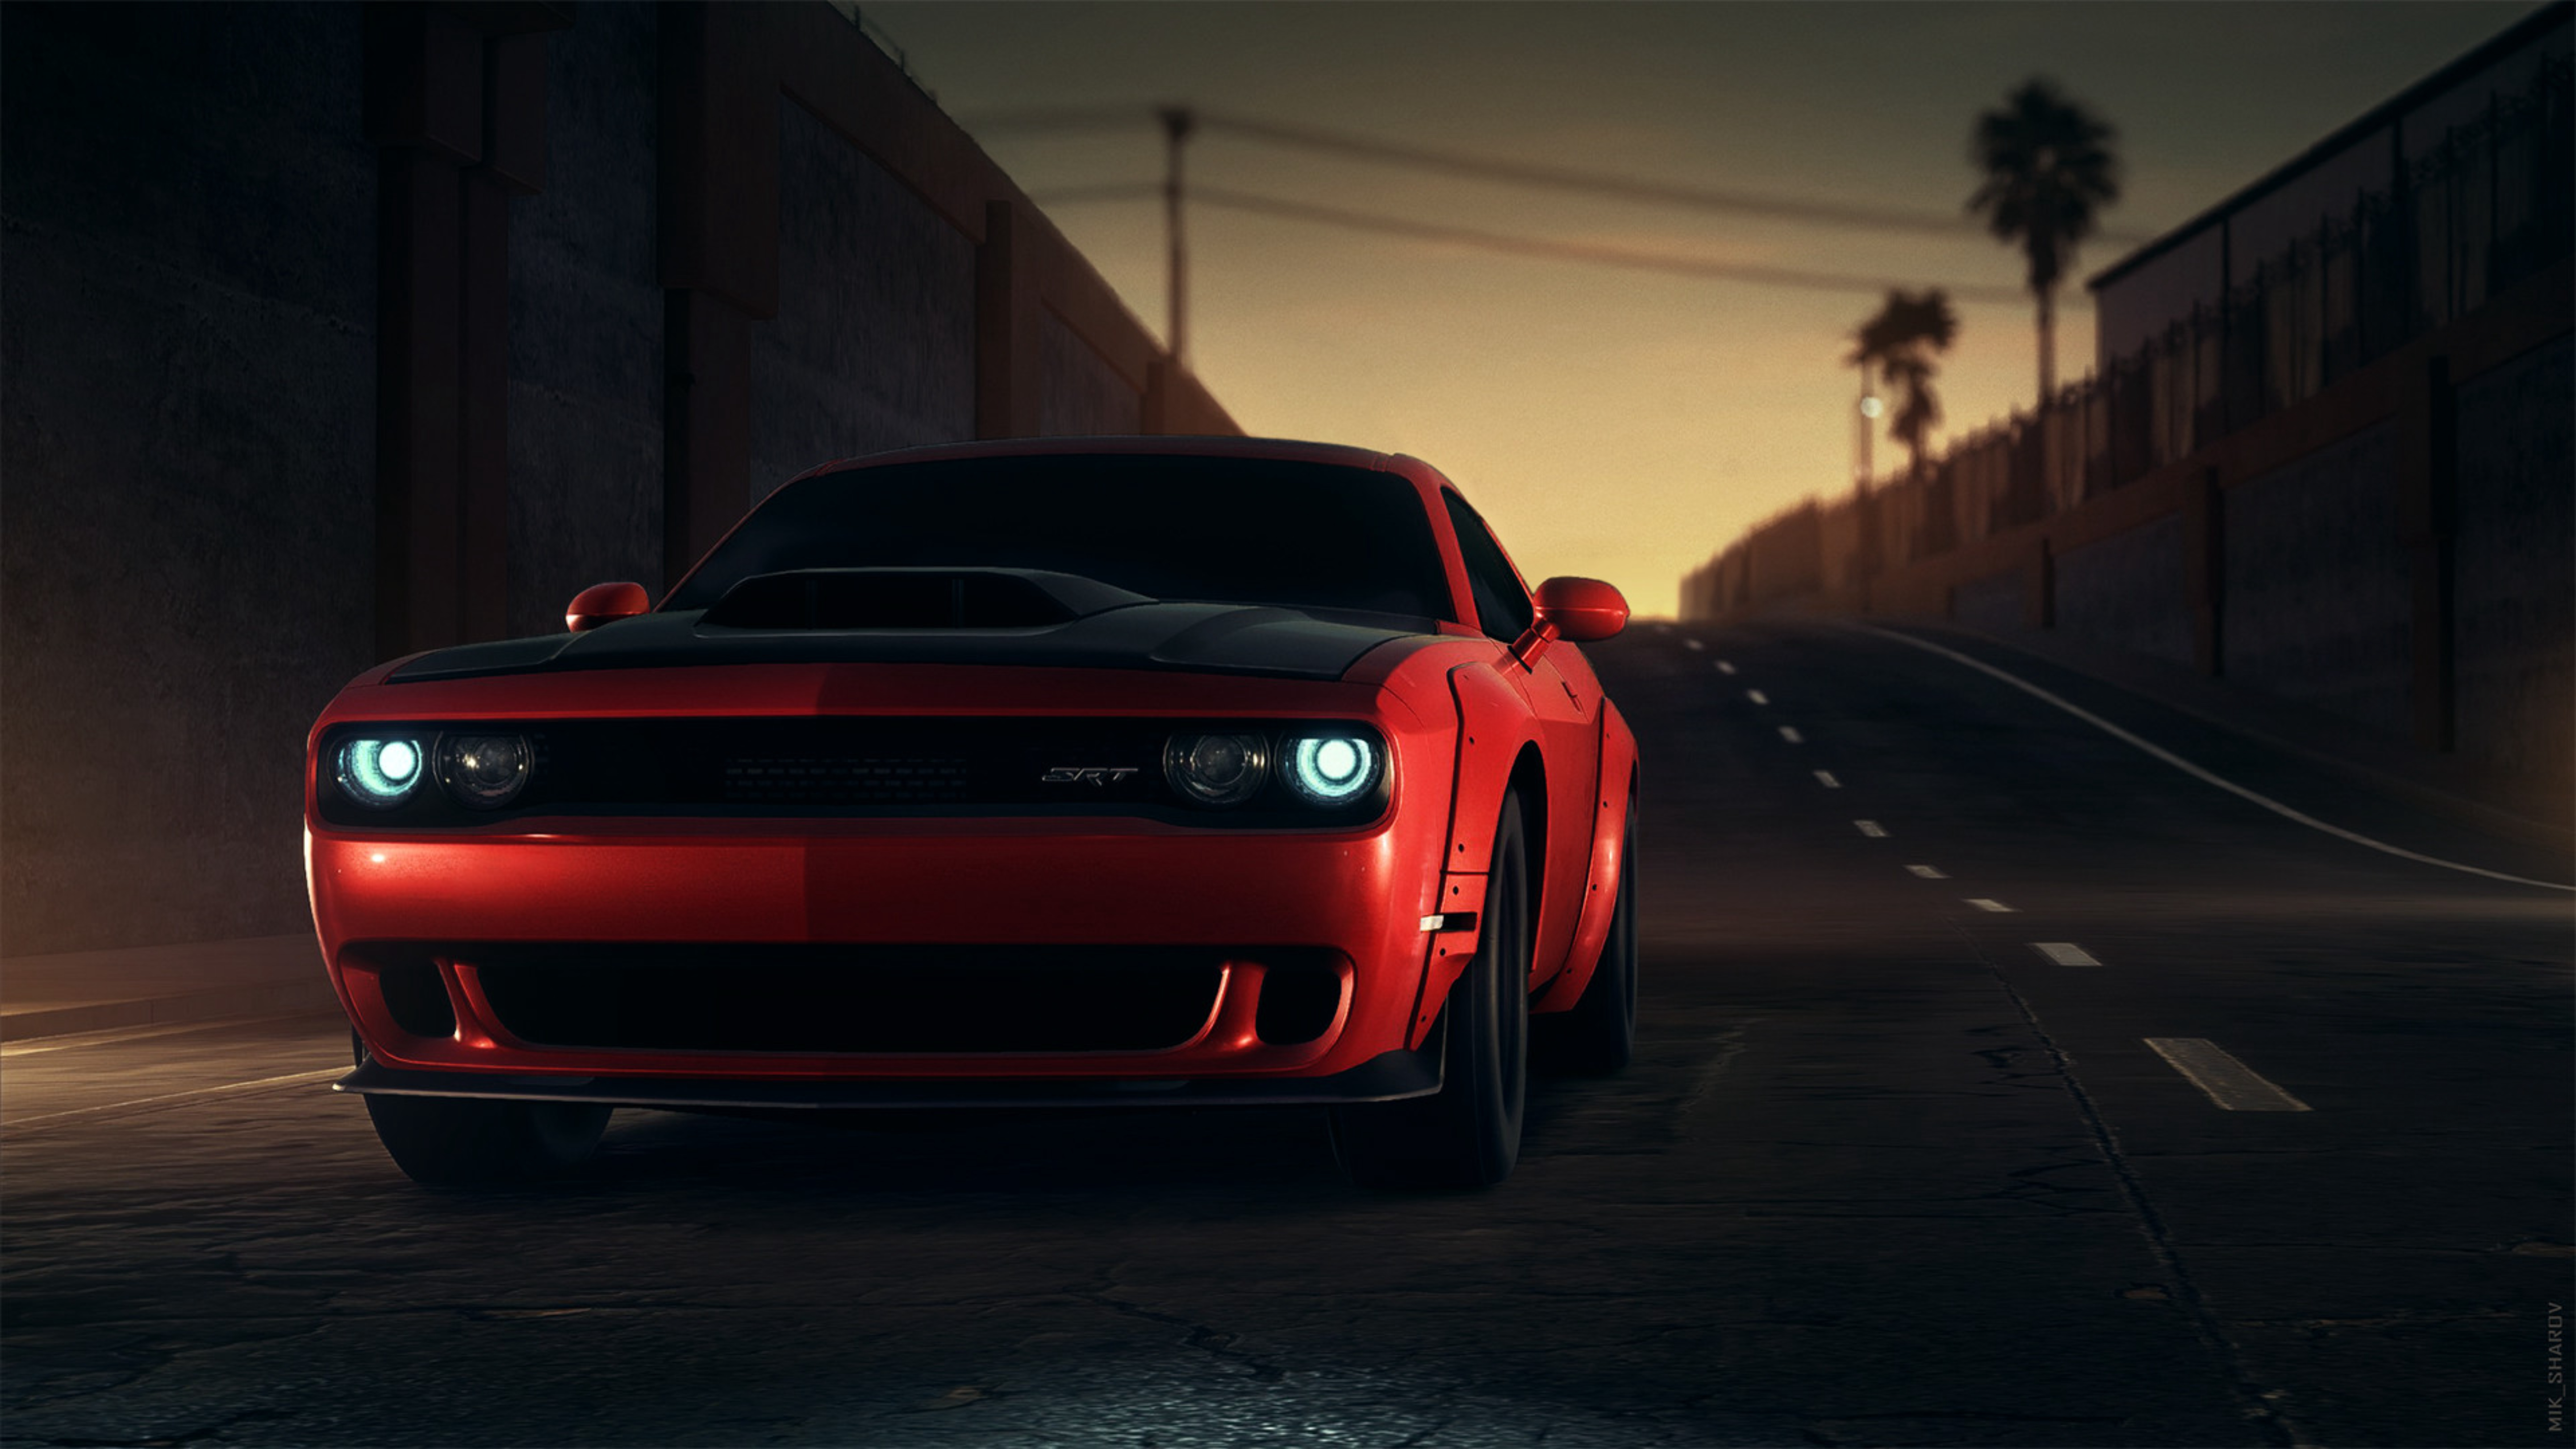 cars, sports car, front view, dodge srt, dodge, headlights, lights, red, sports Smartphone Background